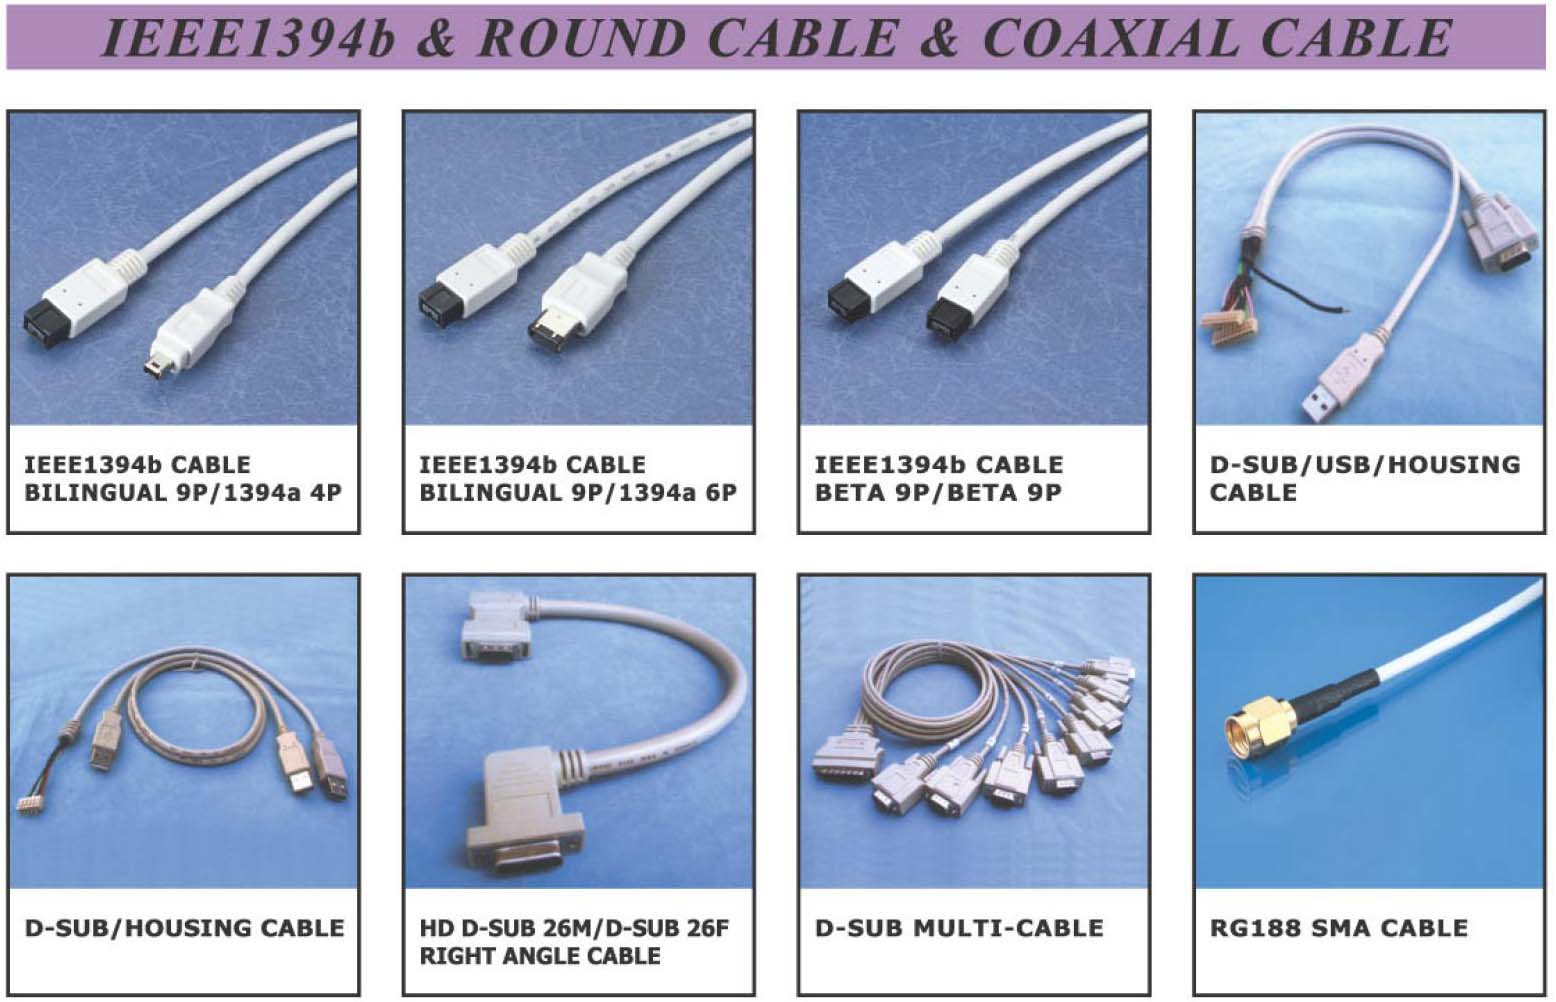 Connector, CableAssembly, WireHarness, PowerBank, WebCam,IEEE1394b Cable